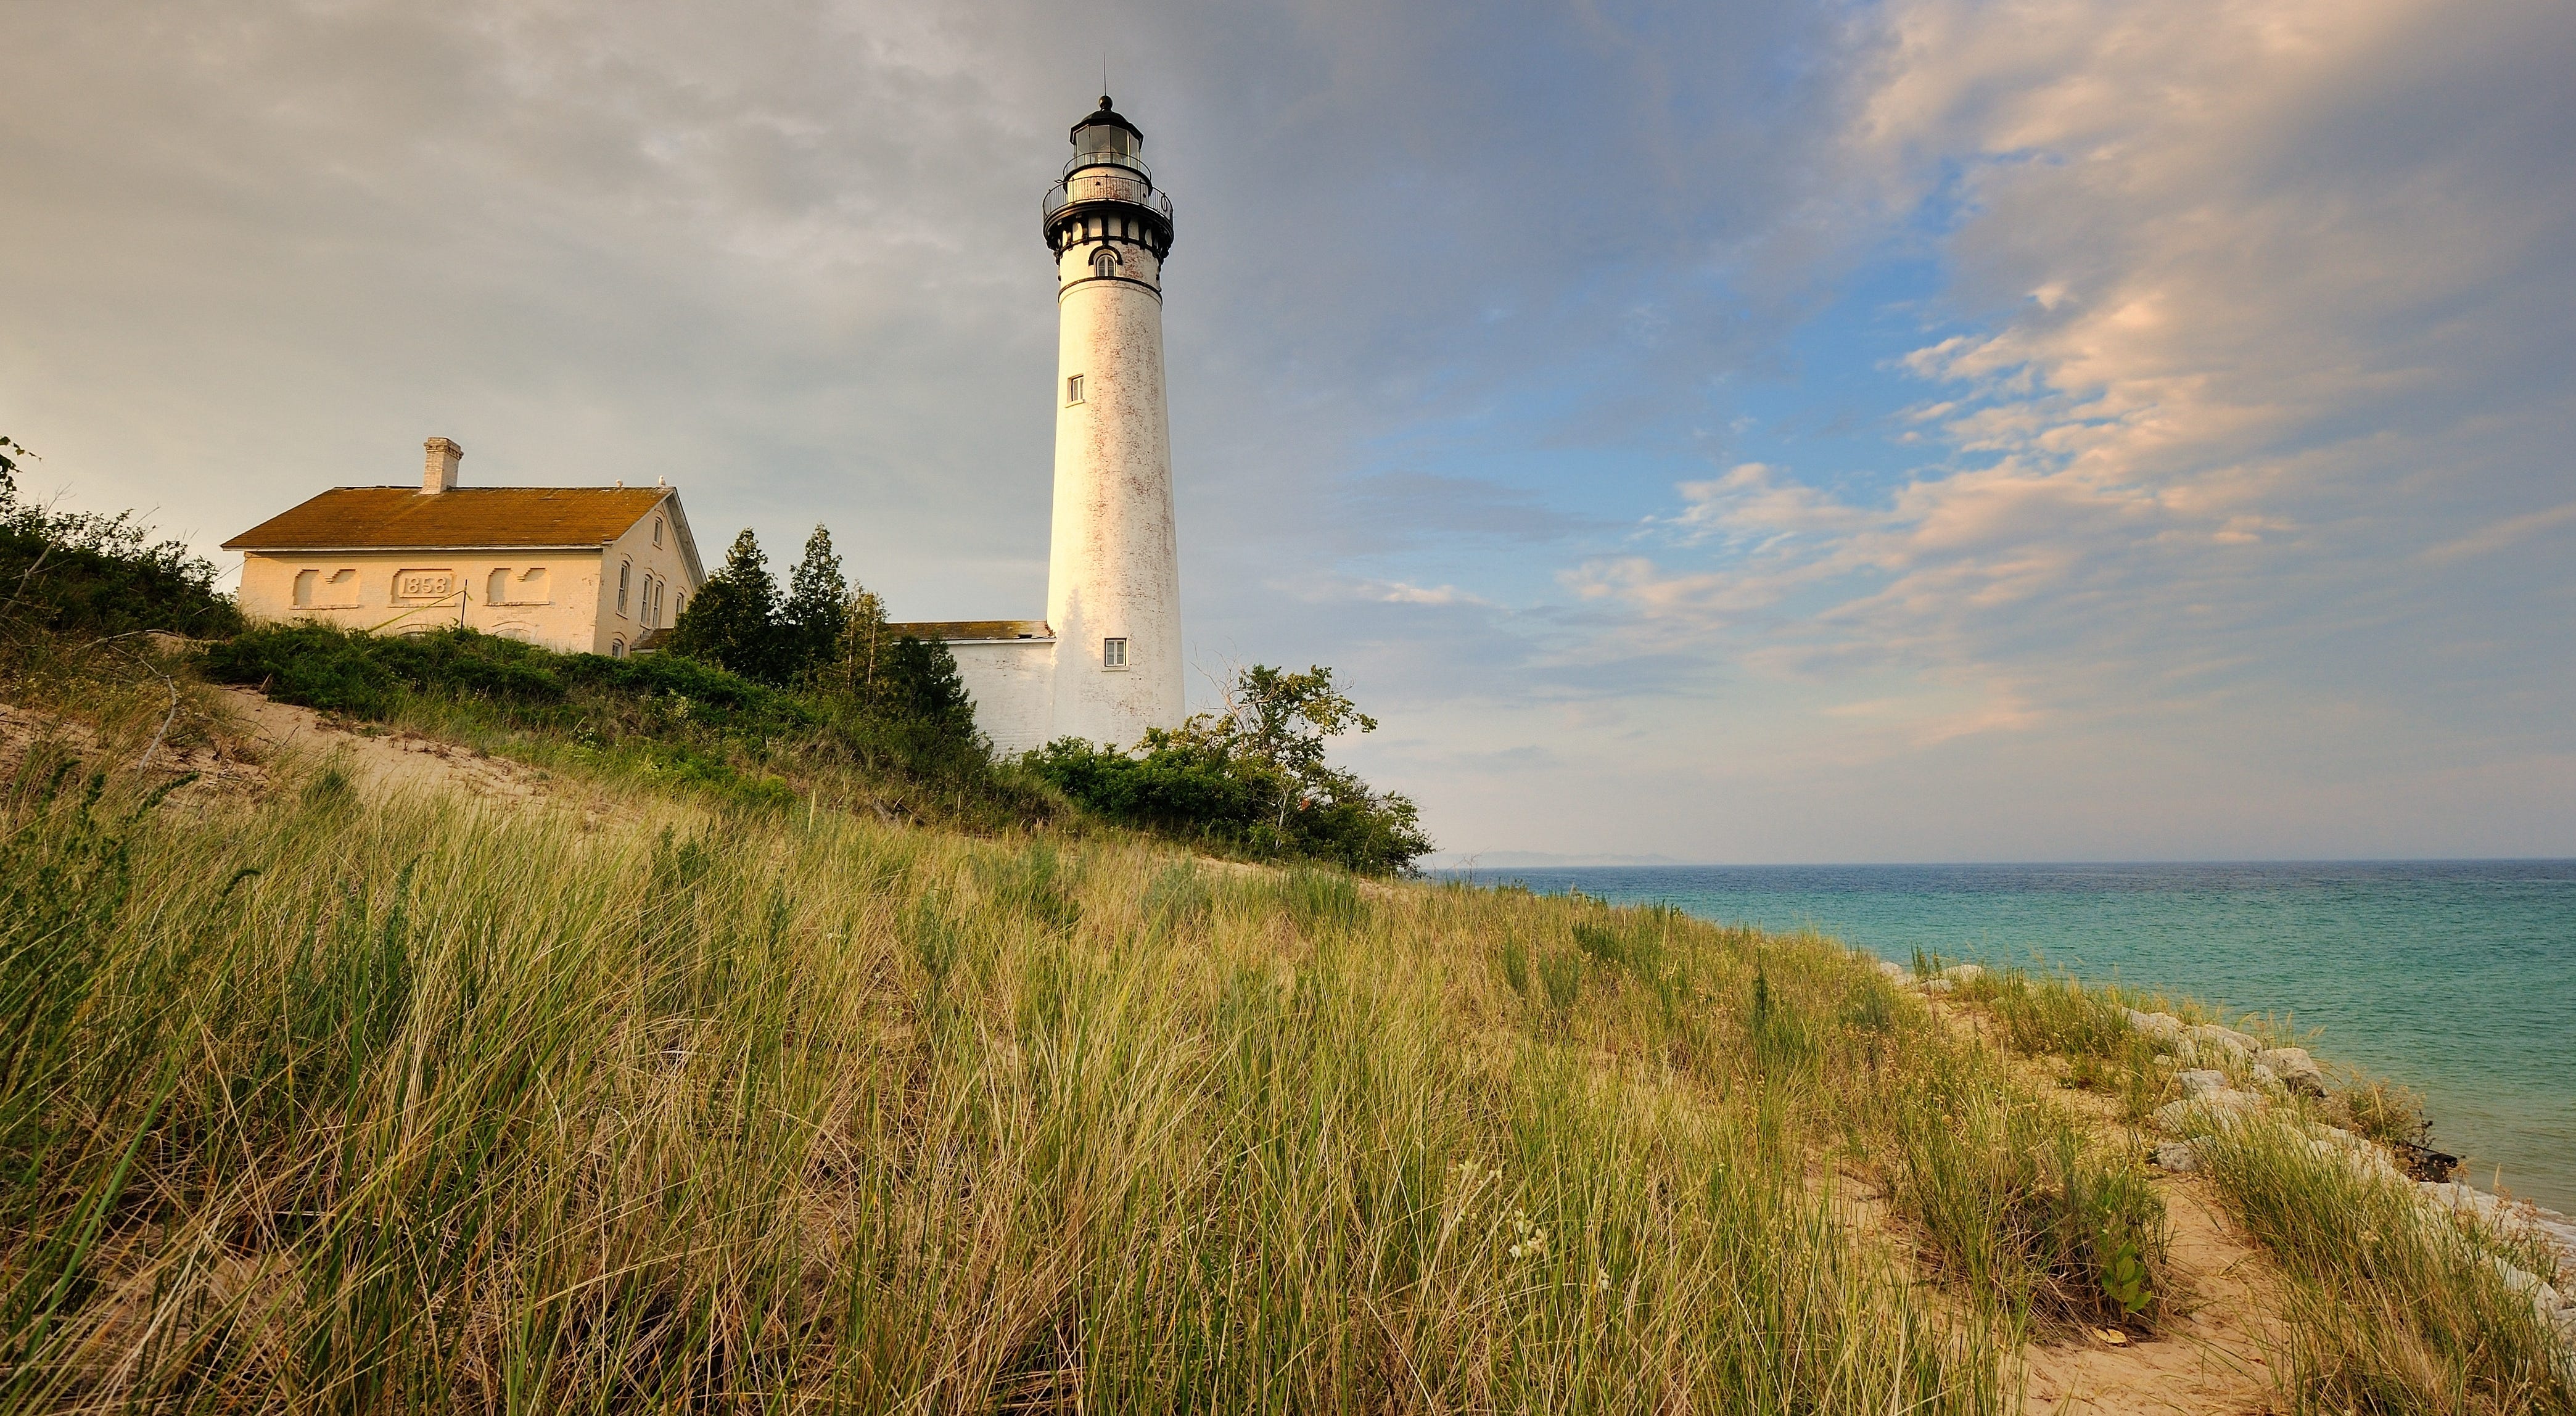 <p>Located on the <a href="https://abcnews.go.com/Travel/best_places_USA/sleeping-bear-dunes-michigan-voted-good-morning-americas/story?id=14319616">coast of Lake Michigan</a>, the park features 64 miles of beaches as well as rolling sand dunes, inland lakes, hiking trails, and water sports.</p>